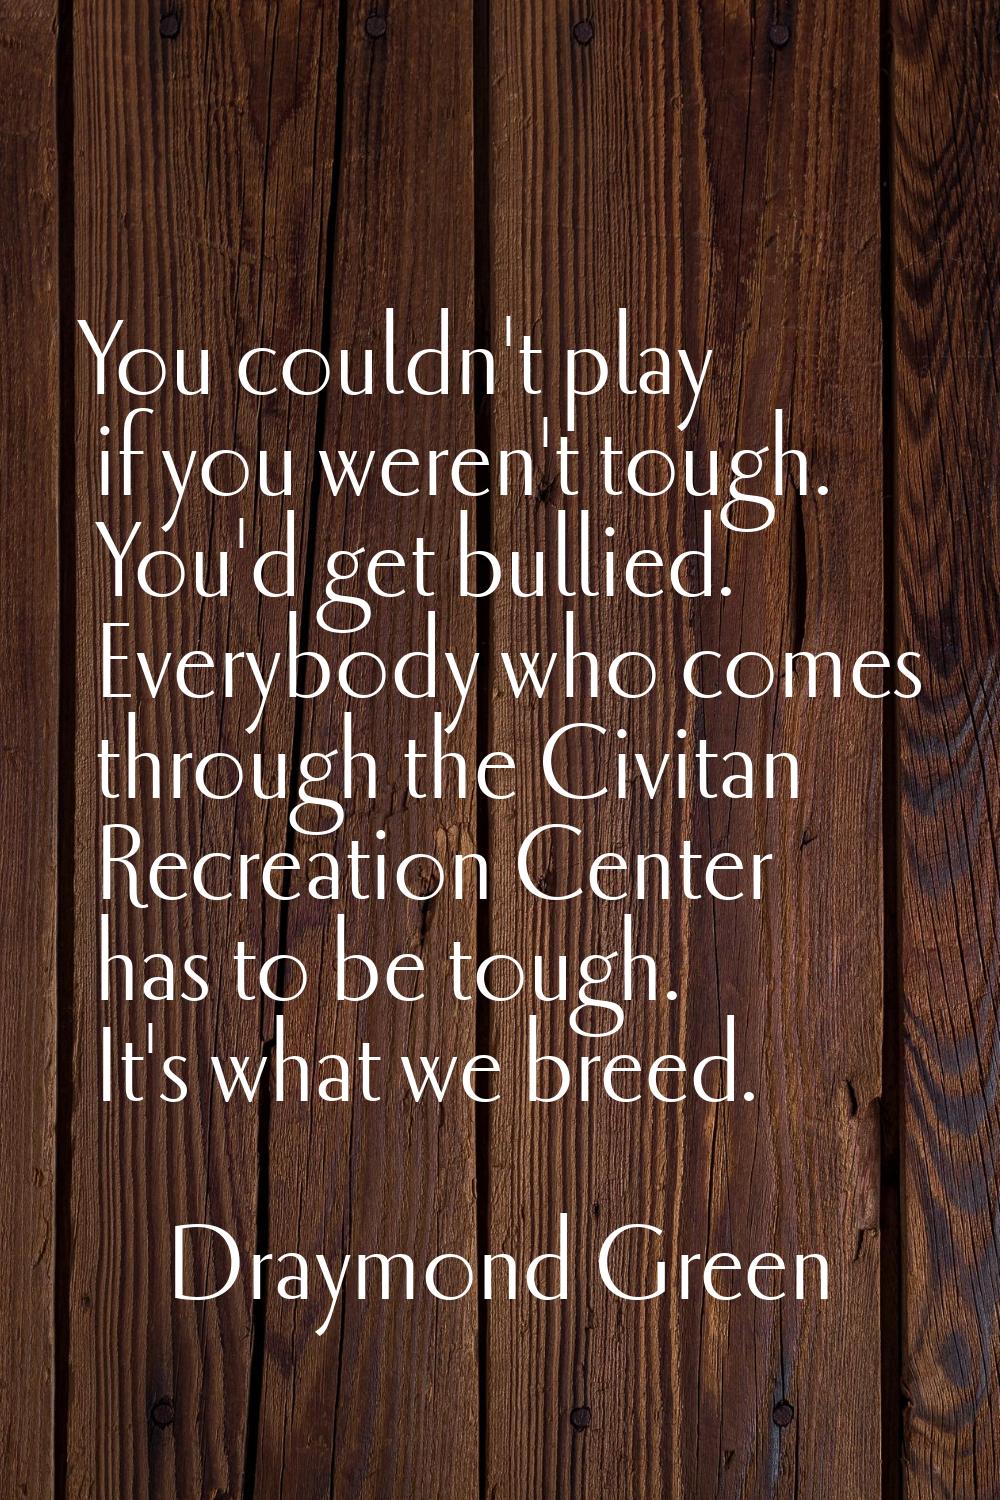 You couldn't play if you weren't tough. You'd get bullied. Everybody who comes through the Civitan 